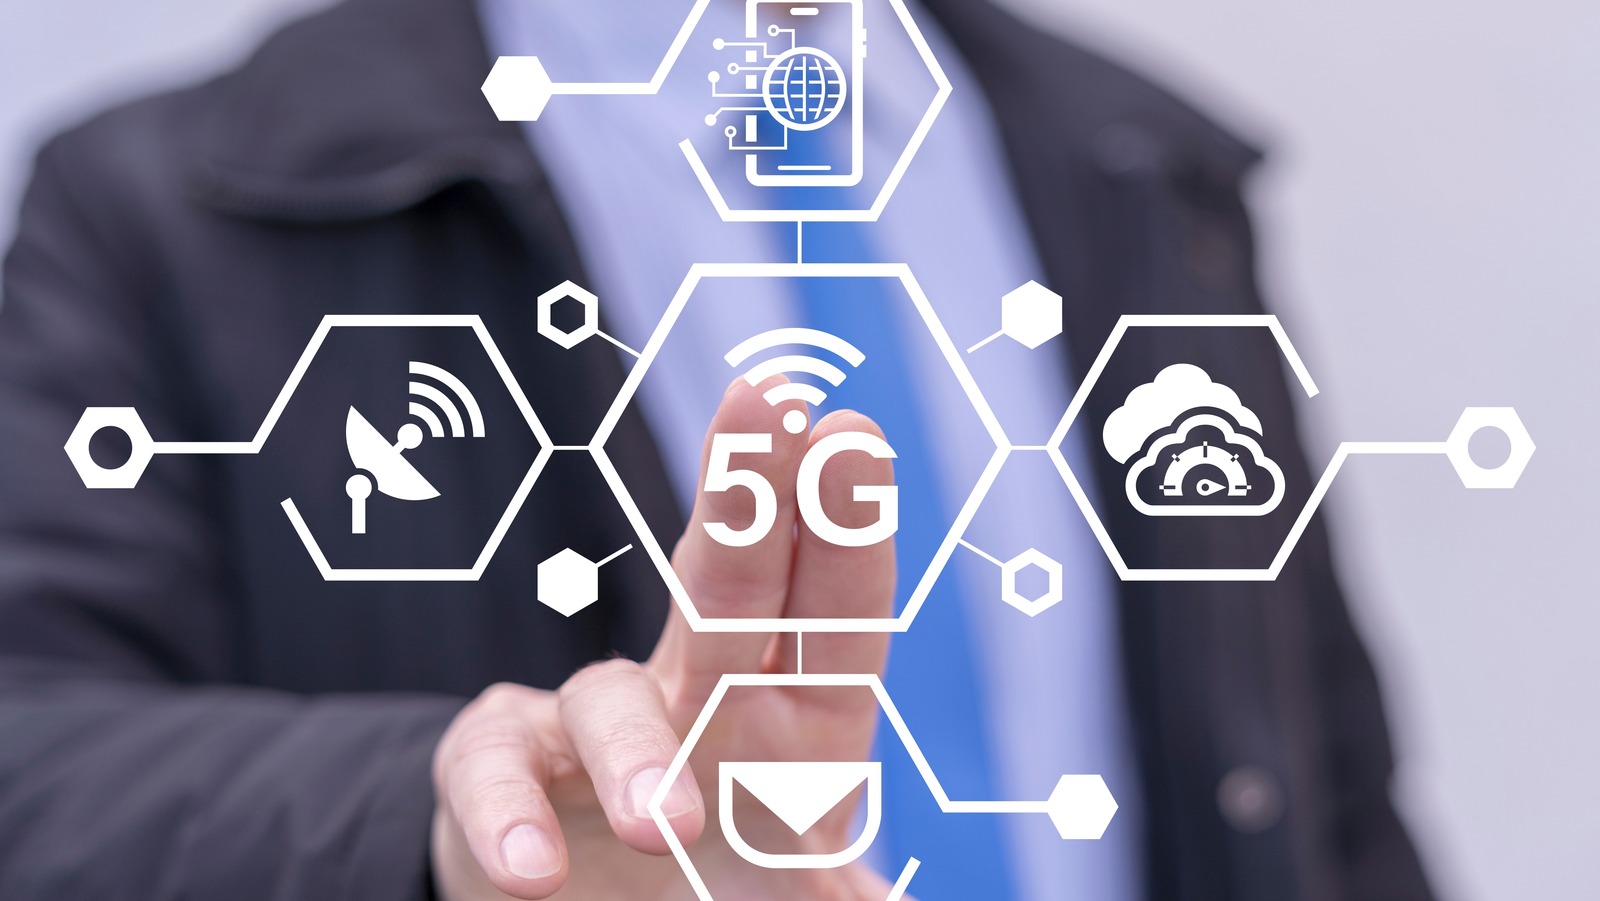 Here's What 5G+ Means On Your Phone (And Why It Matters)